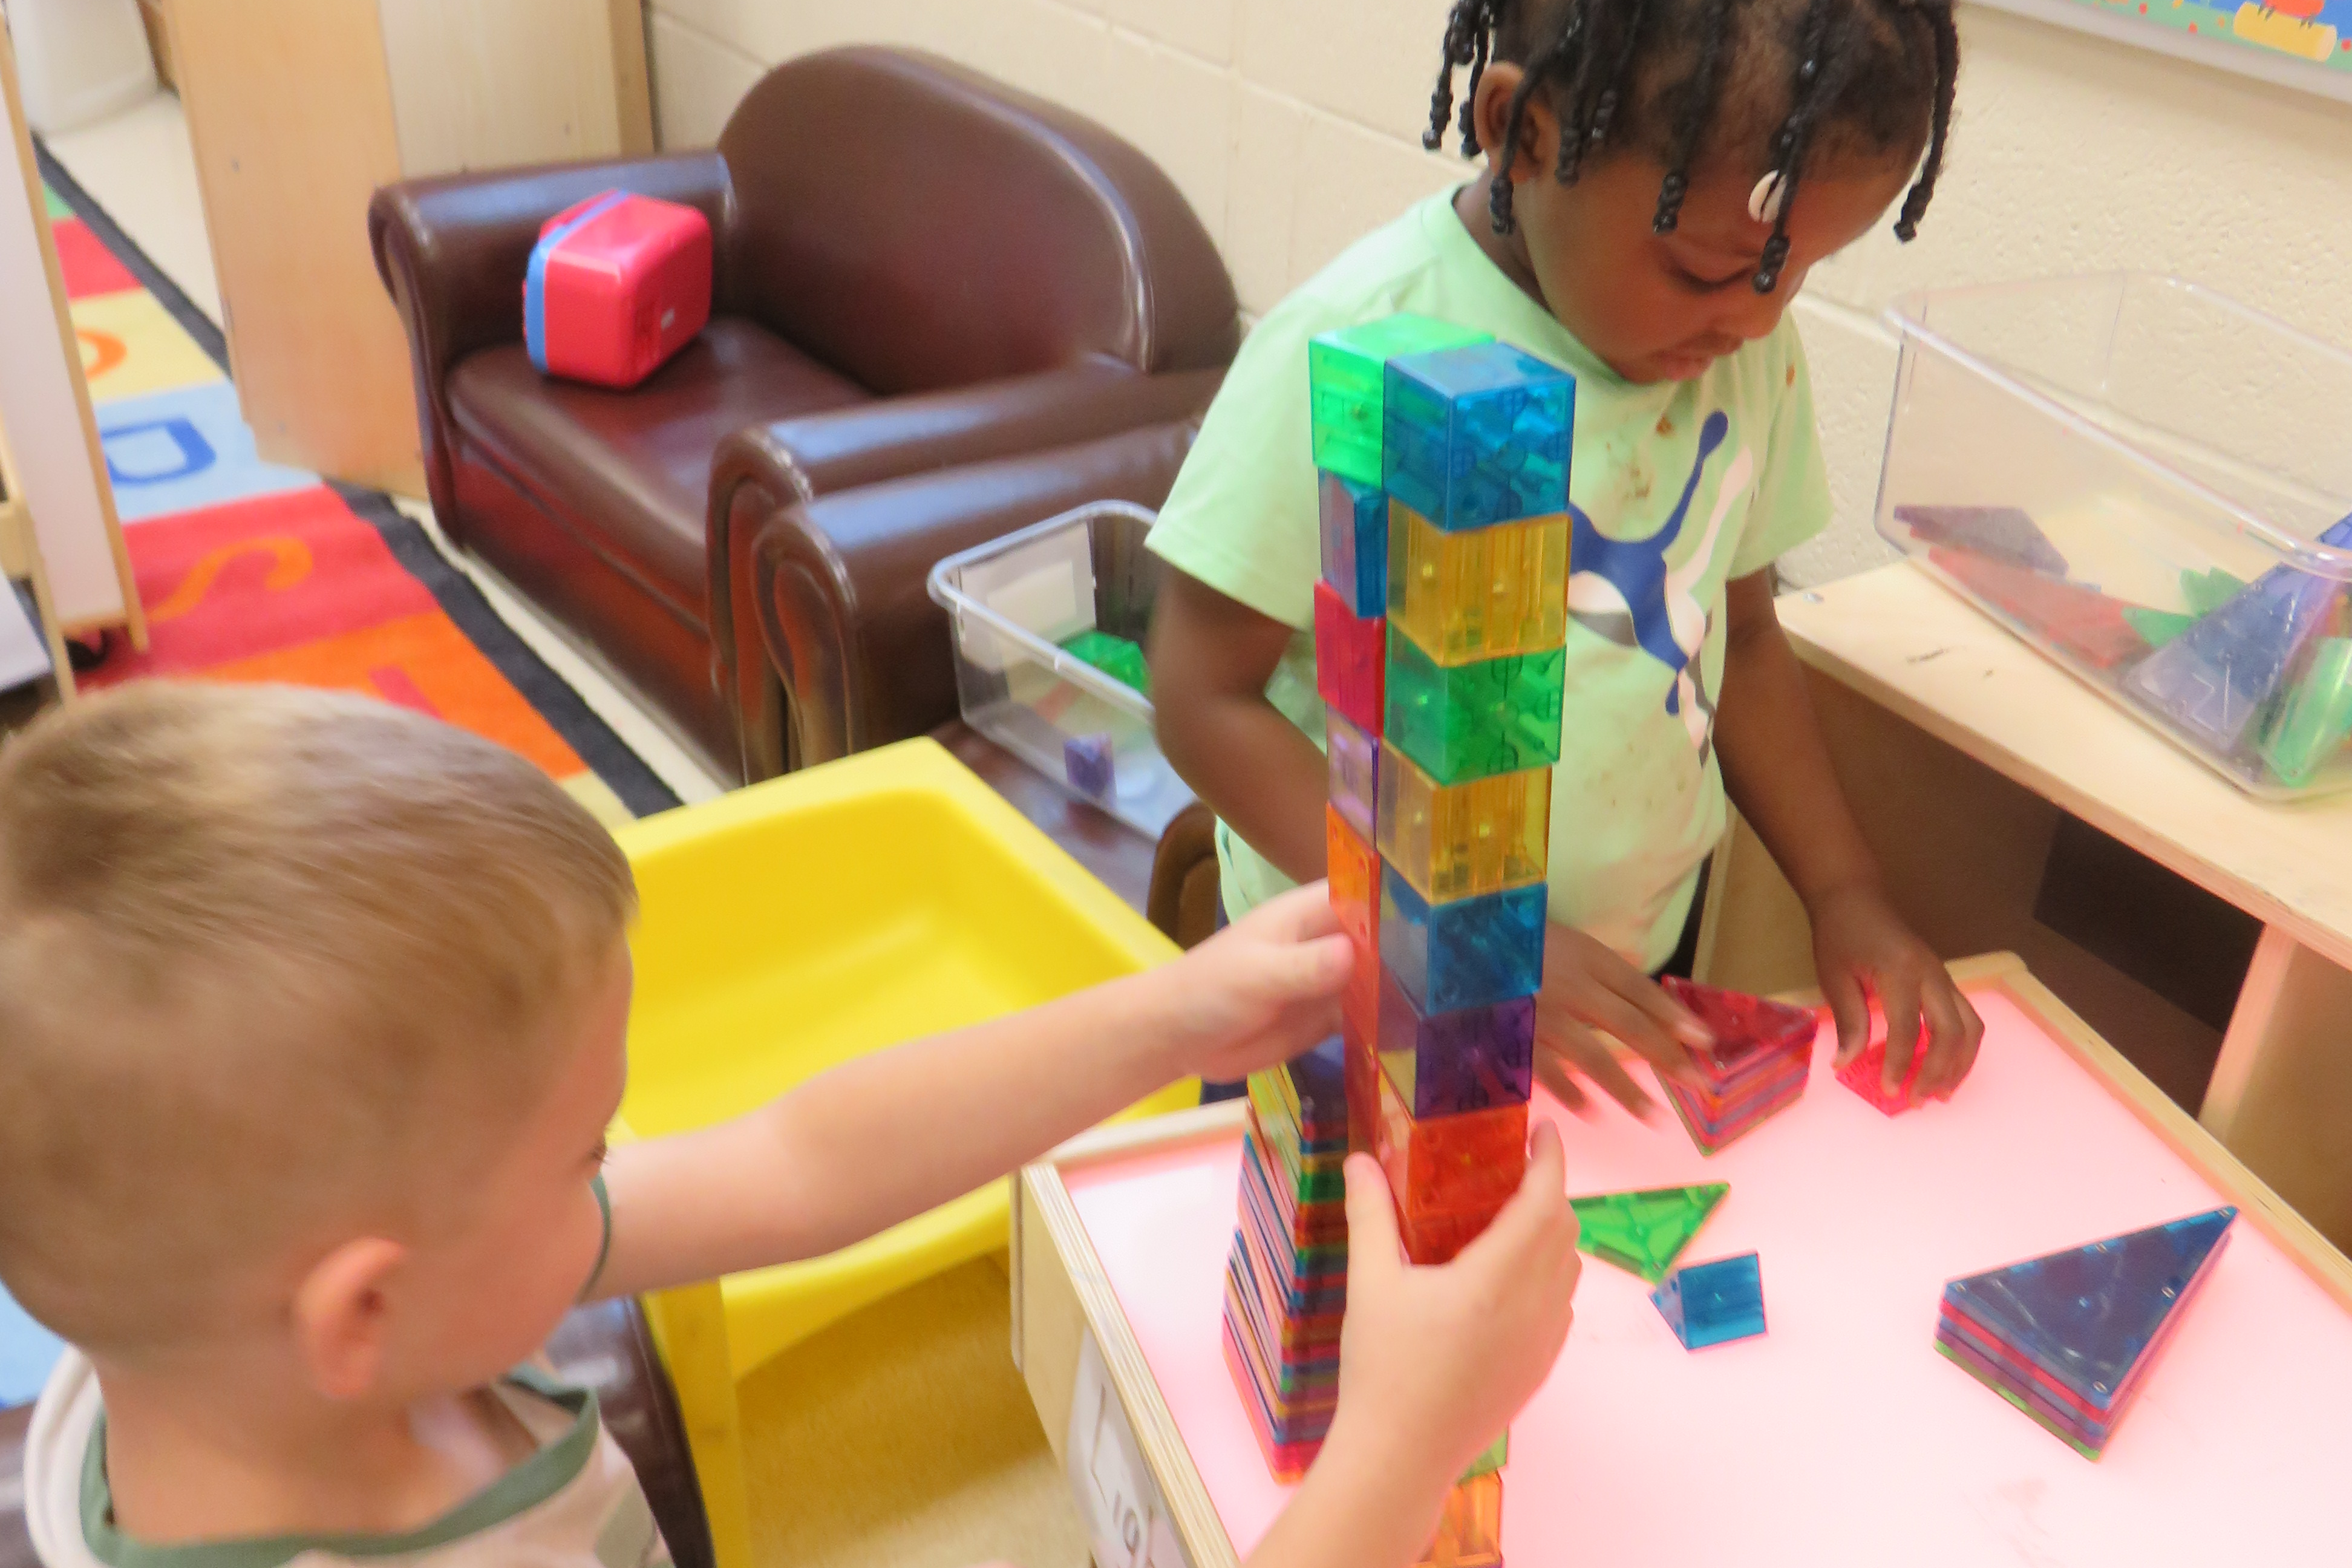 Preschool scholars playing with magnetic blocks.